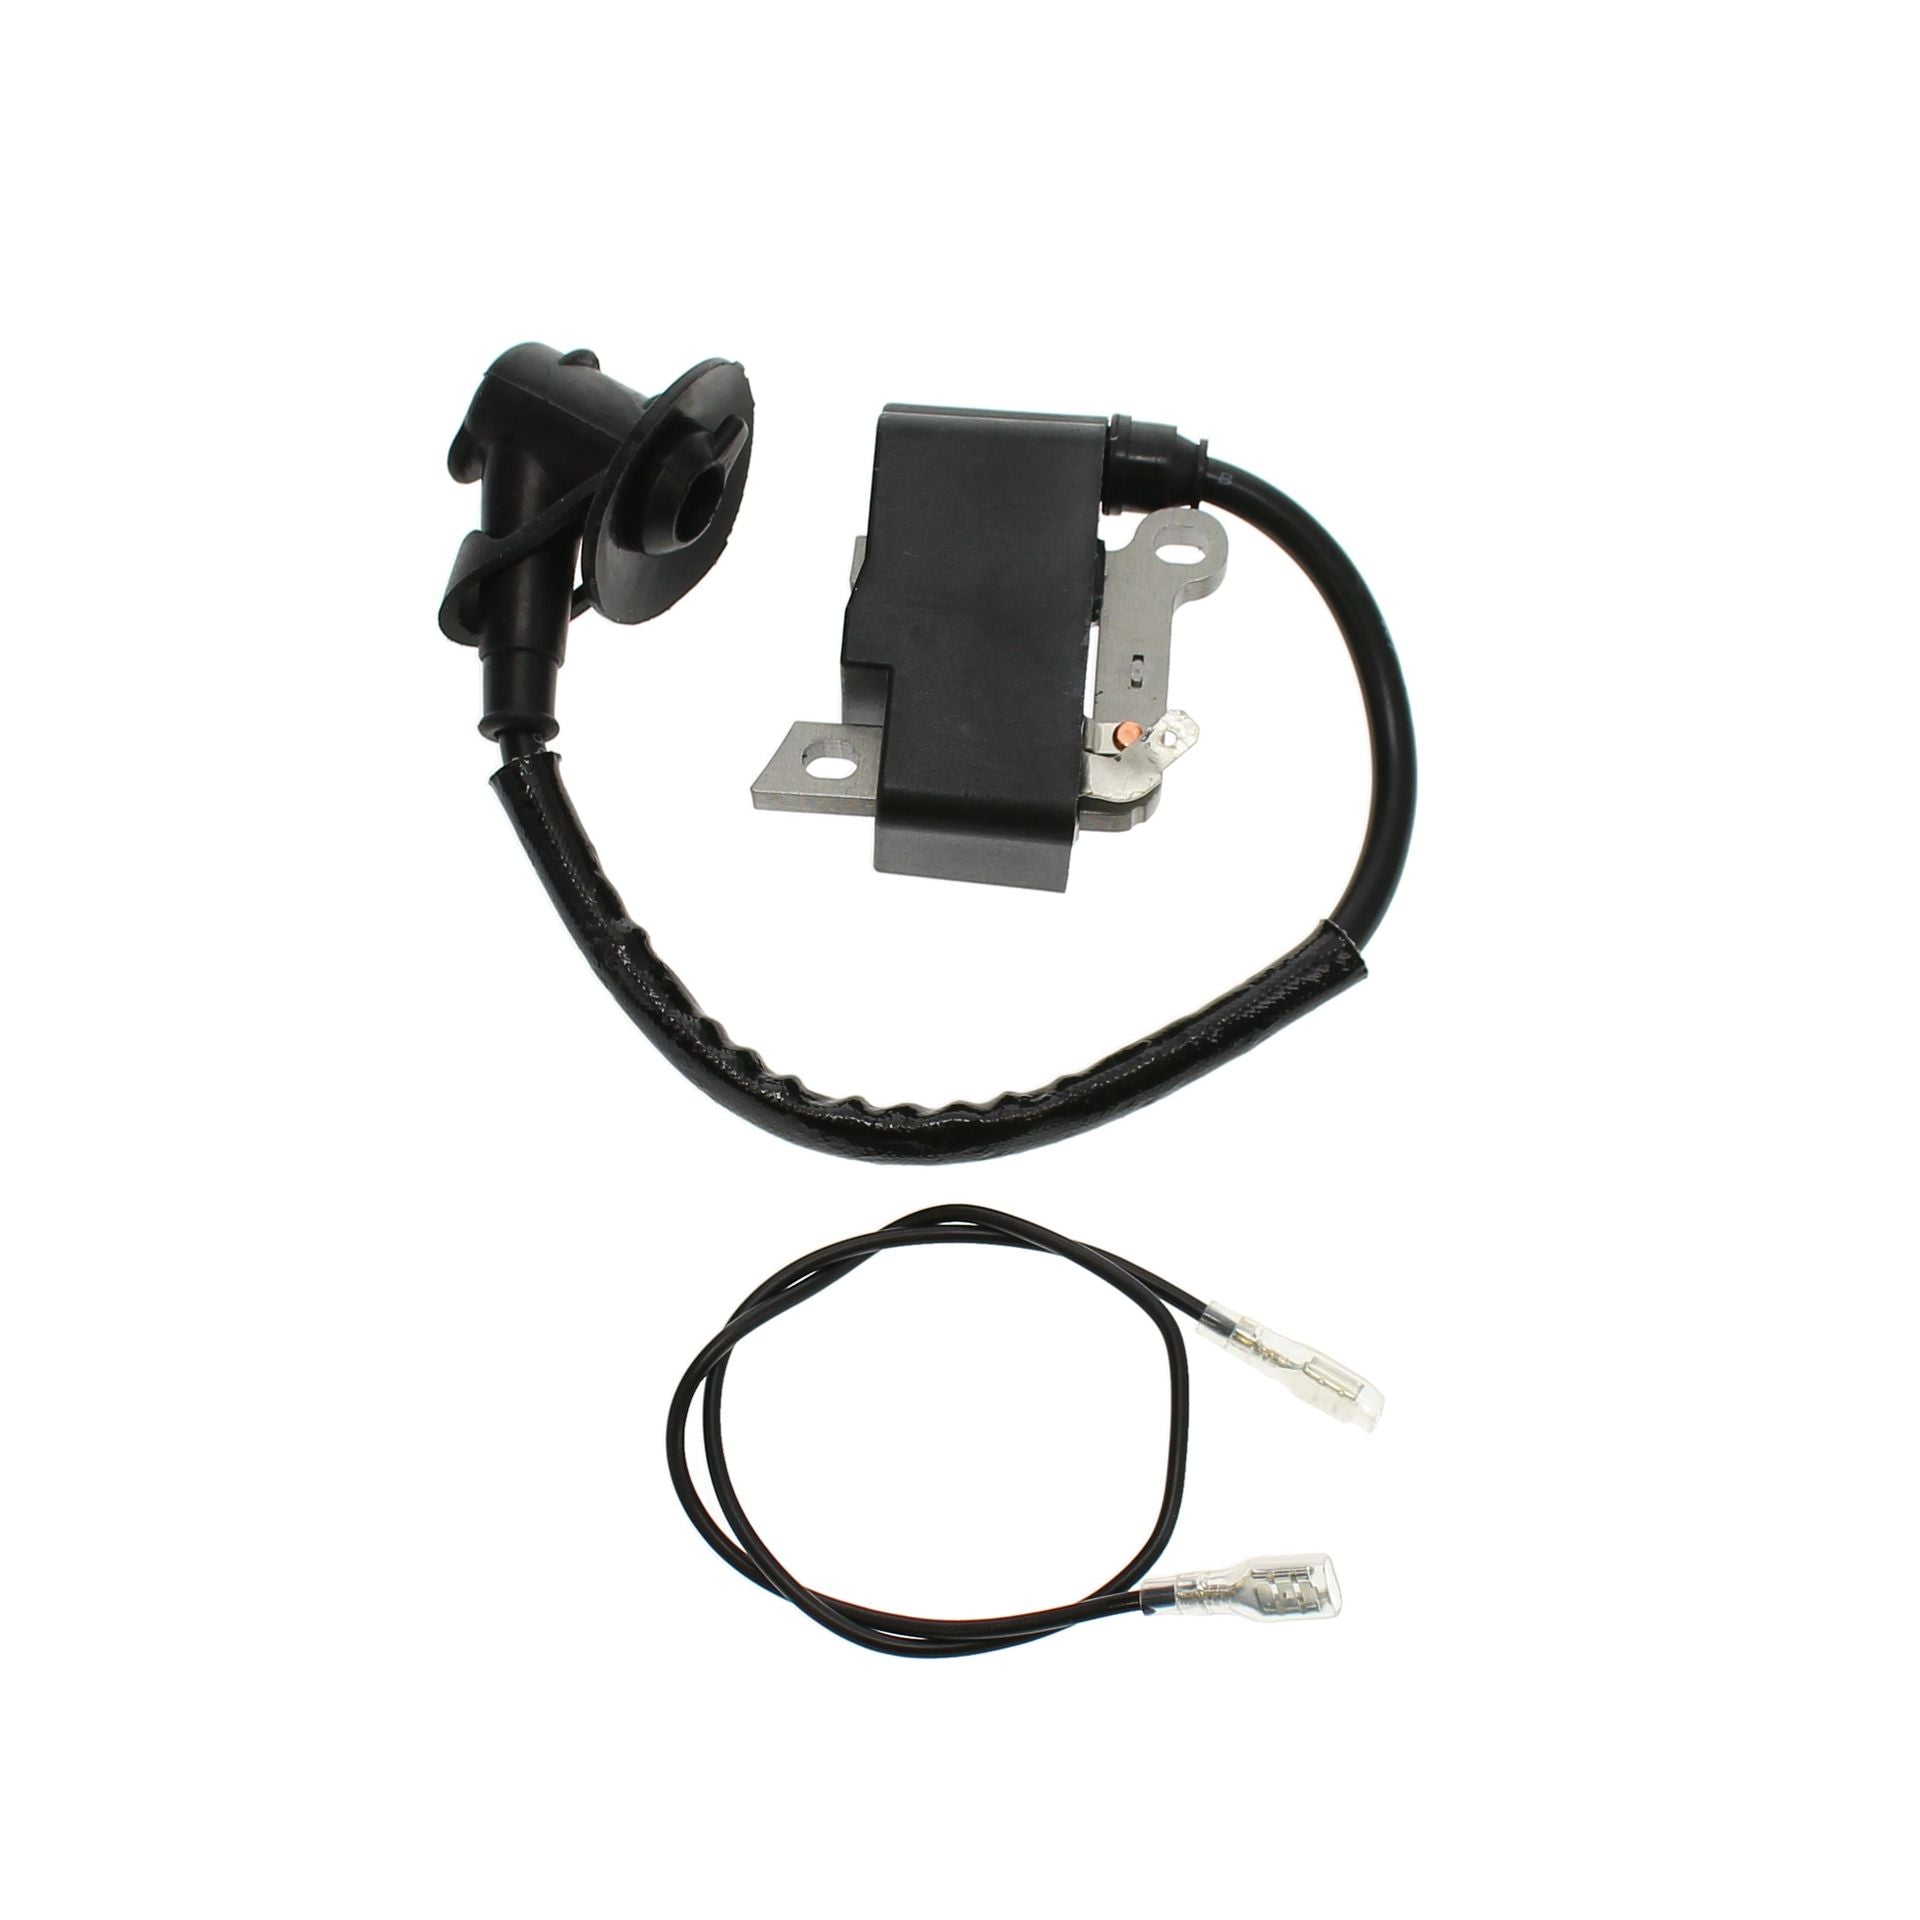 Ignition Coil fits Stihl MS661, MS661C, MS661-CM OEM 1144-400-1301, 1144-400-4704